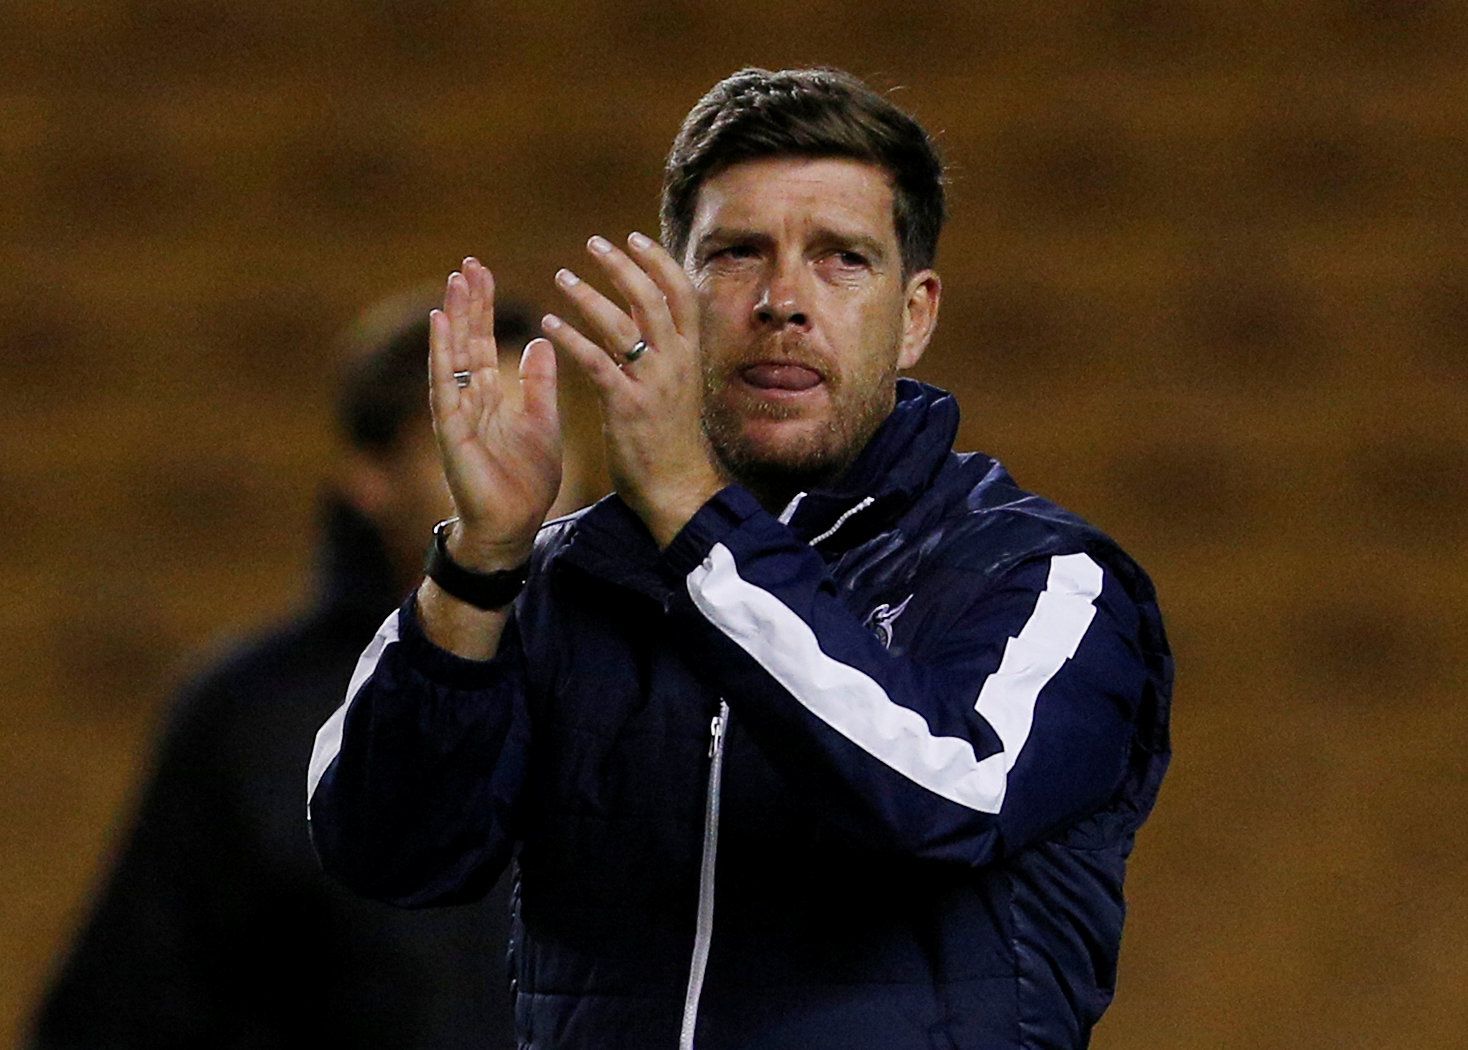 Soccer Football - Carabao Cup Third Round - Wolverhampton Wanderers vs Bristol Rovers - Molineux Stadium, Wolverhampton, Britain - September 19, 2017   Bristol Rovers manager Darrell Clarke applauds the fans after the match   Action Images/Craig Brough   EDITORIAL USE ONLY. No use with unauthorized audio, video, data, fixture lists, club/league logos or 